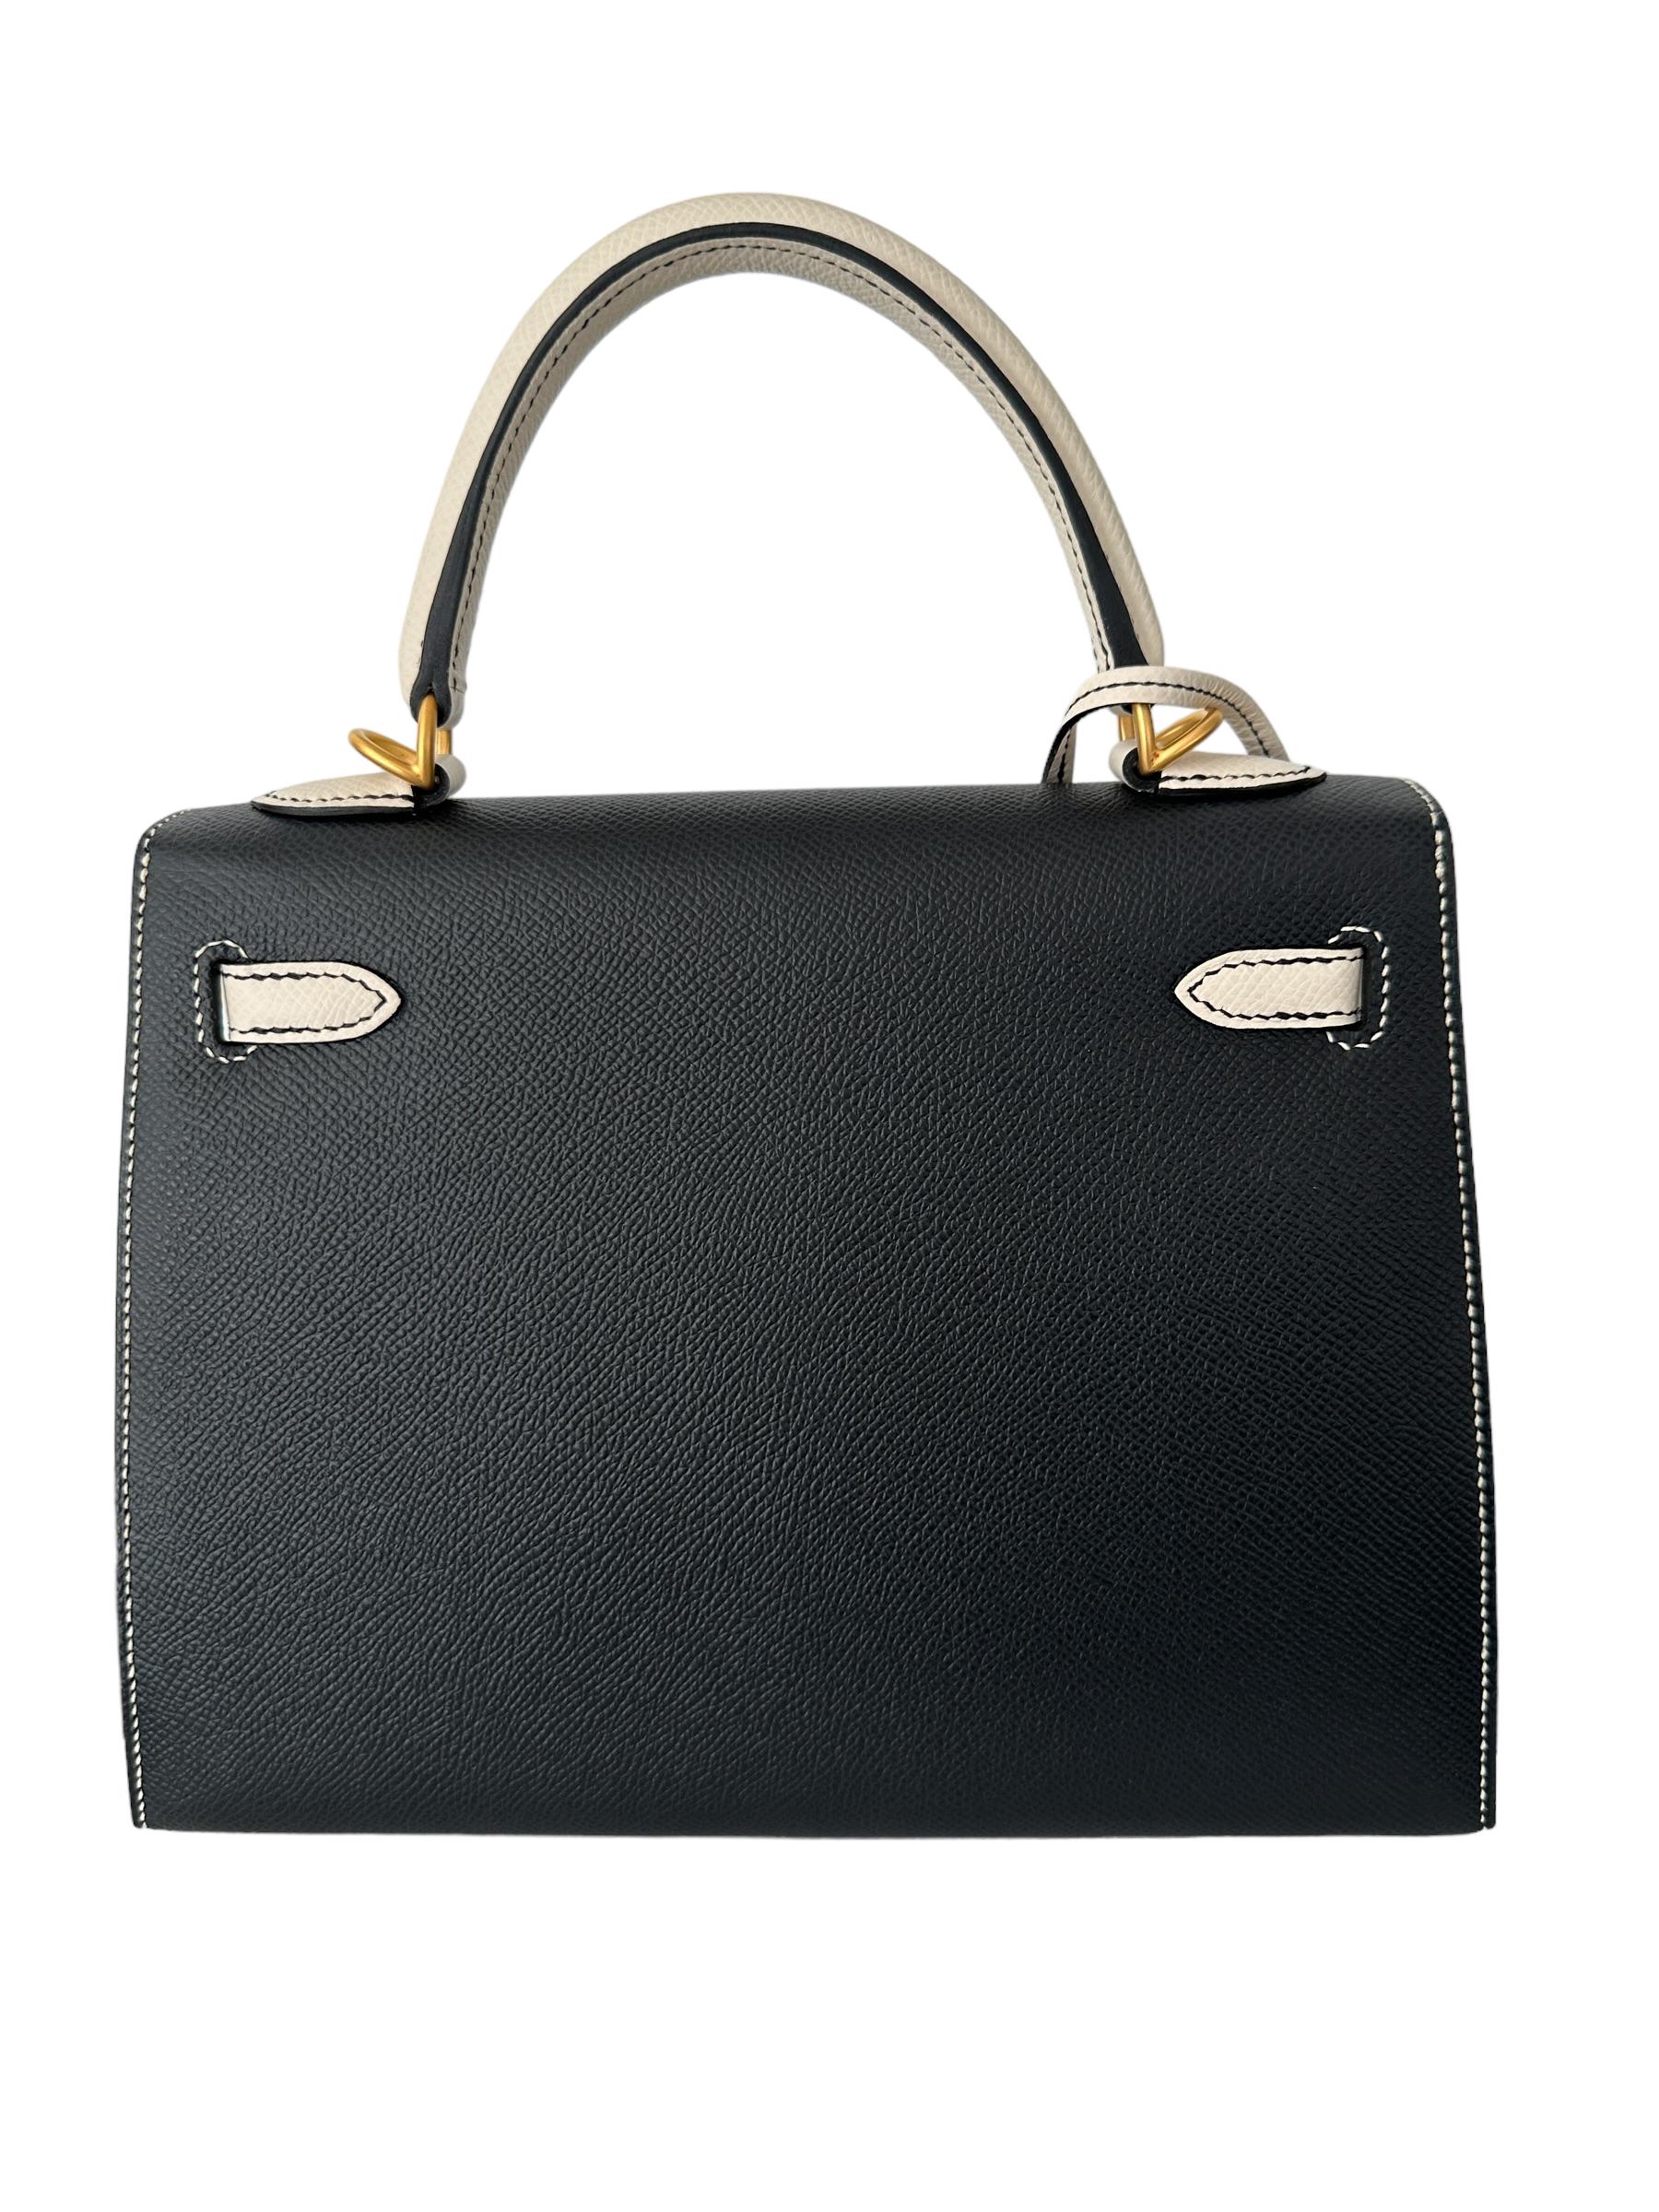 This Special Order Kelly, in the Sellier style, is in Black and Craie epsom leather with brushed gold hardware 
Contrast Stitching, so chic!
Removable shoulder strap
Original plastic on all the hardware including shoulder strap


The Hermes Special